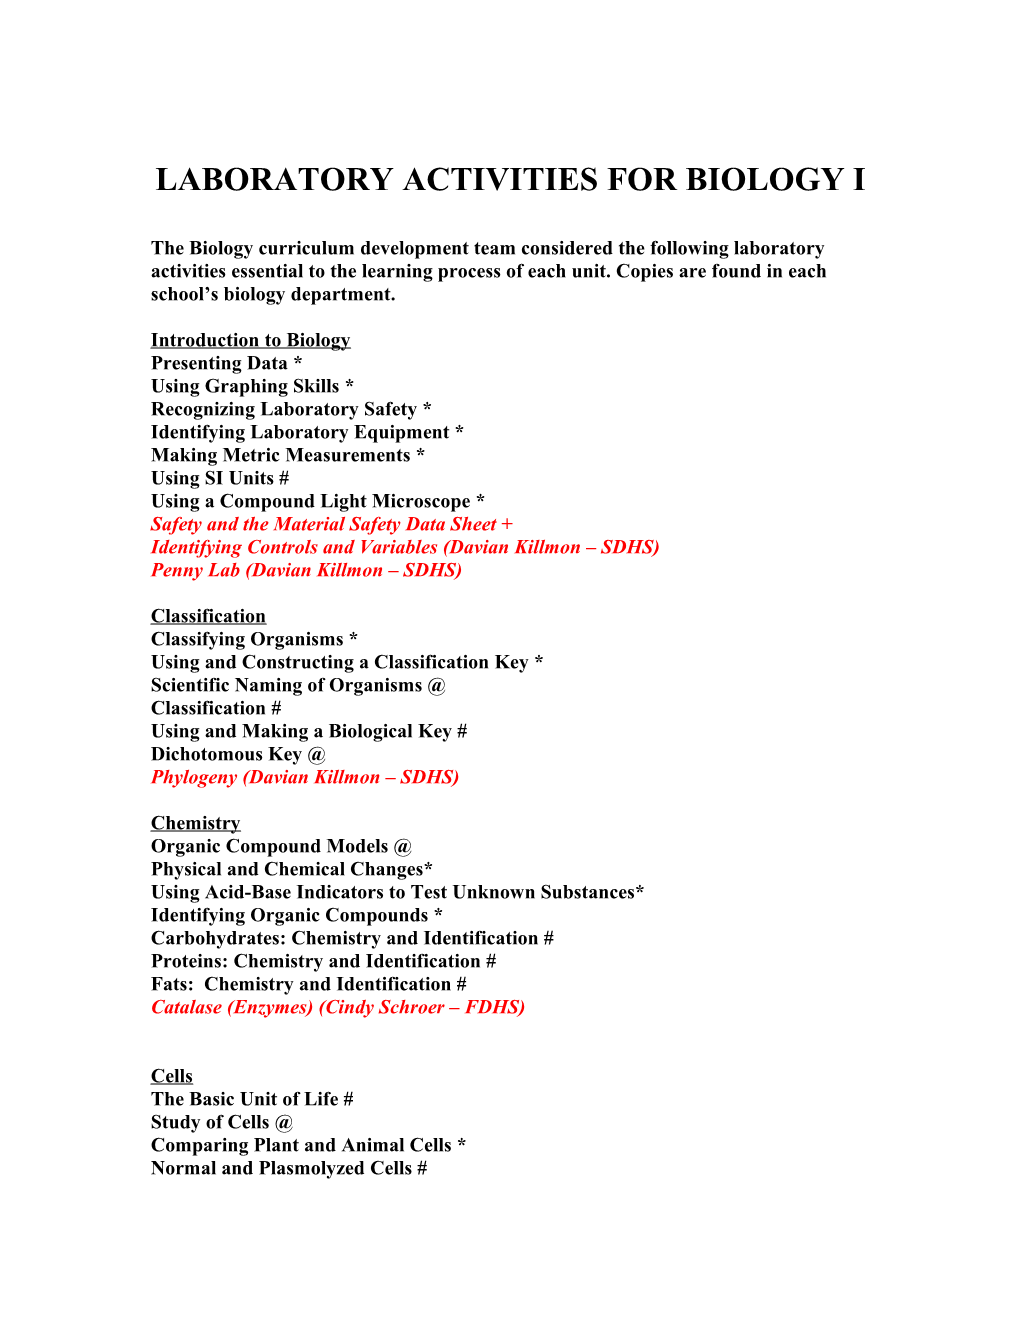 Laboratory Activities for Biology I